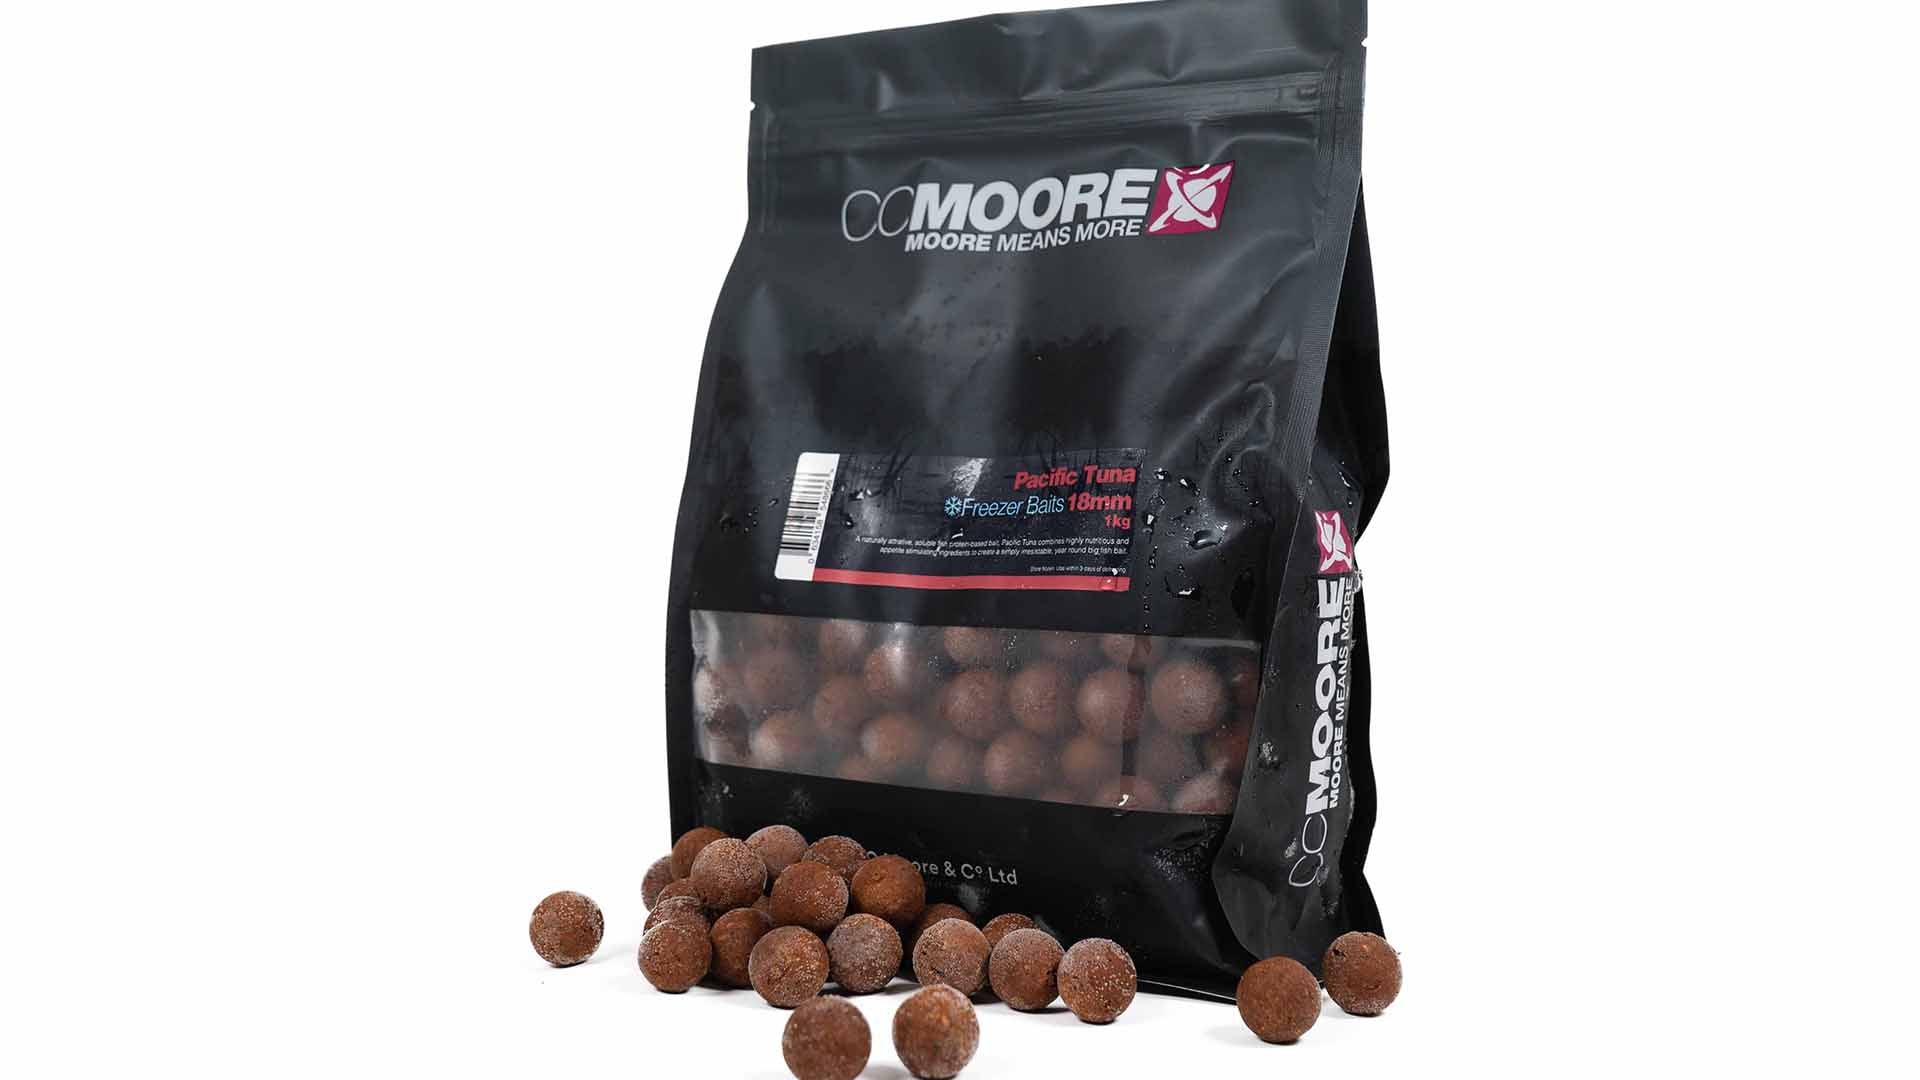 CC MOORE CC MOORE Pacific Tuna Freezer Baits CC MOORE Pacific Tuna Freezer Baits 18mm 1kg - Parkfield Angling Centre